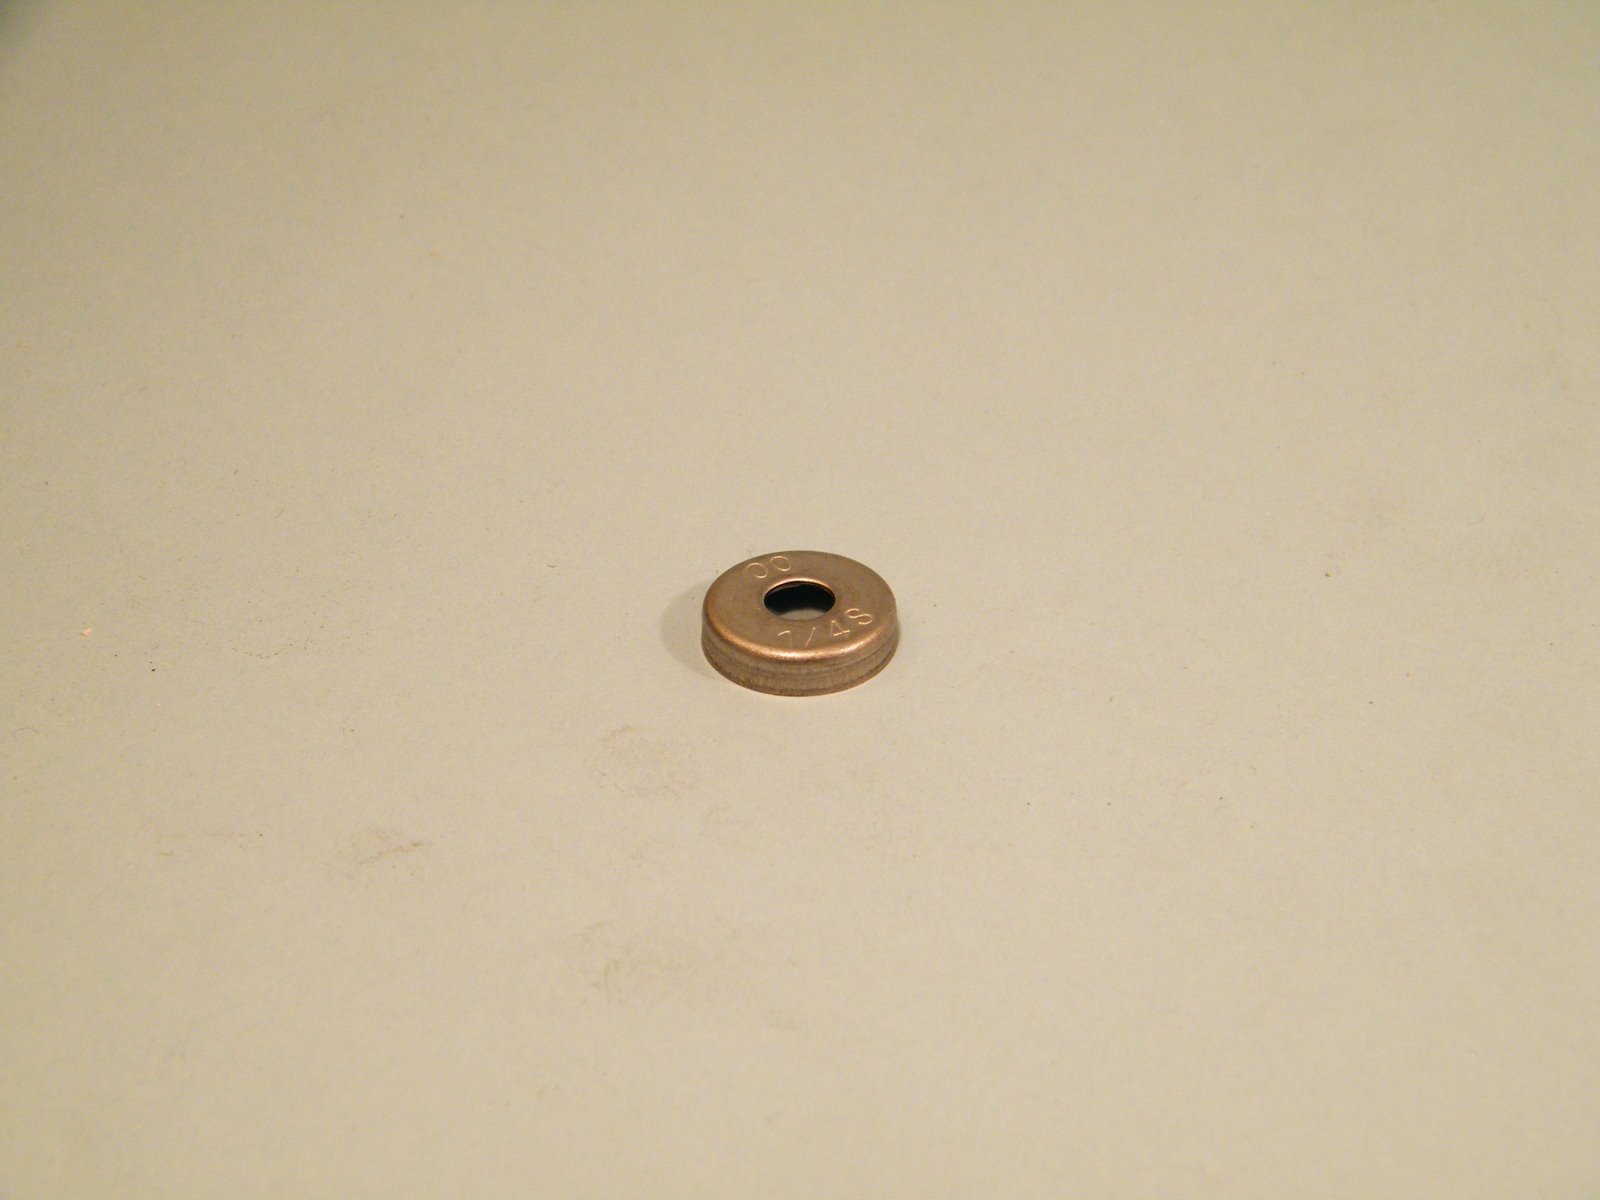 00 FAUCET WASHER RETAINER